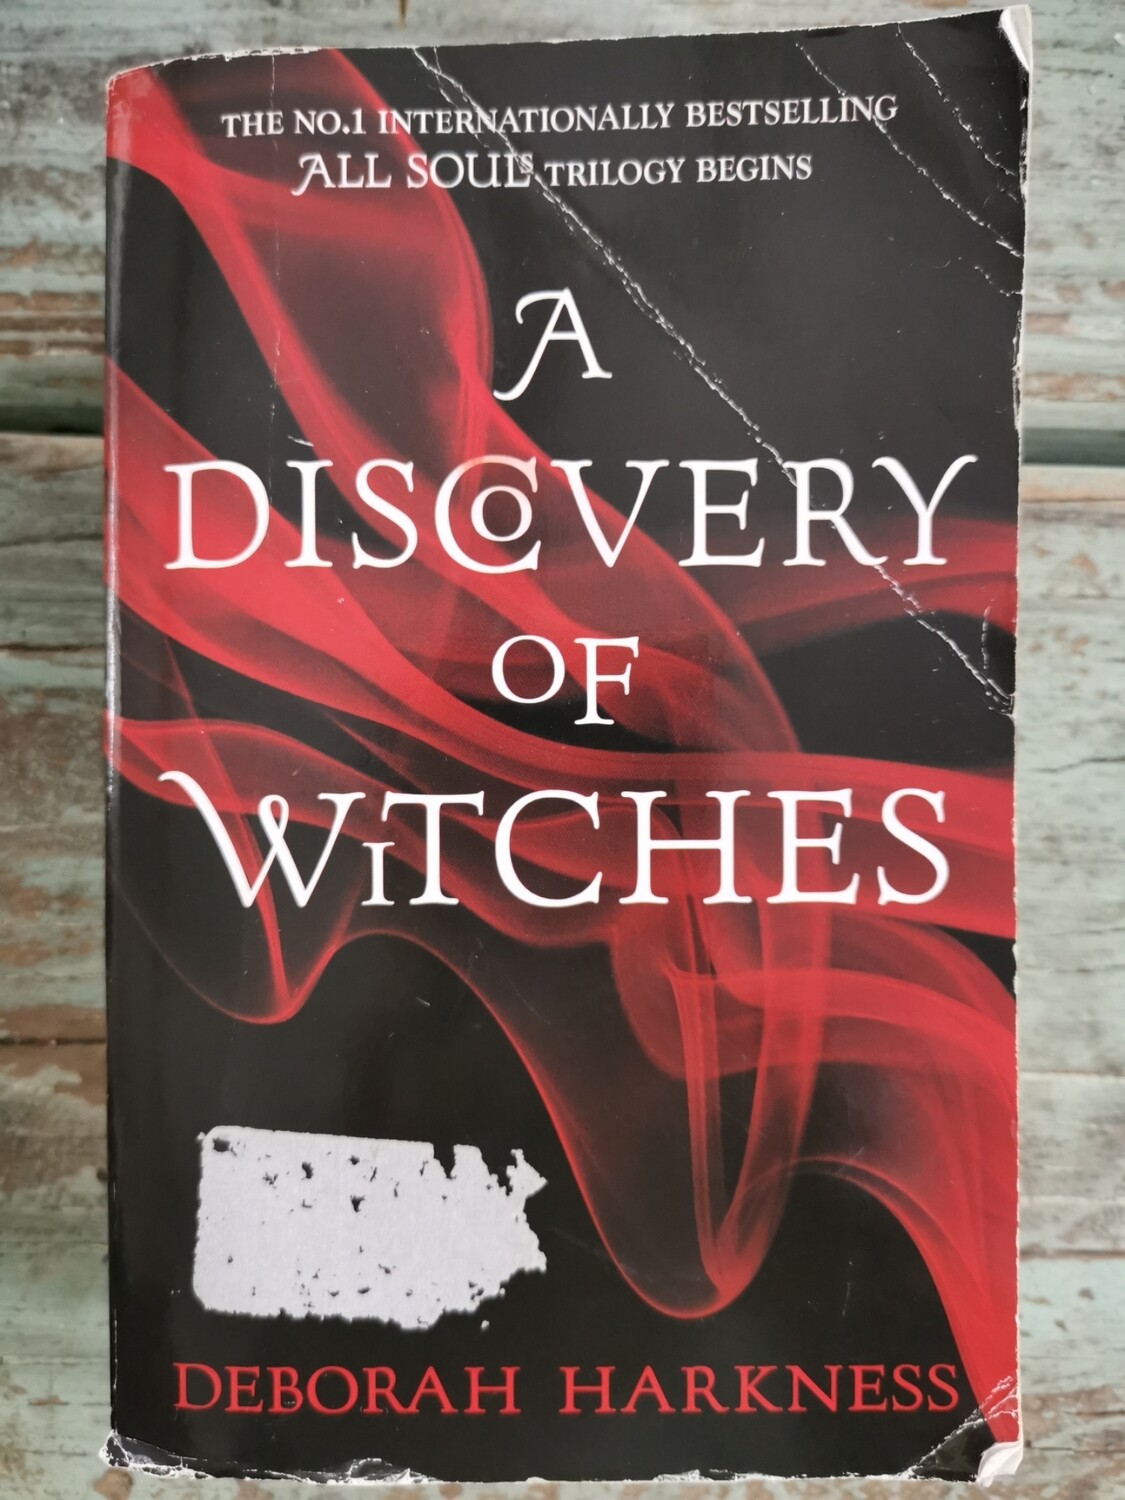 A discovery of witches, Deborah Harkness